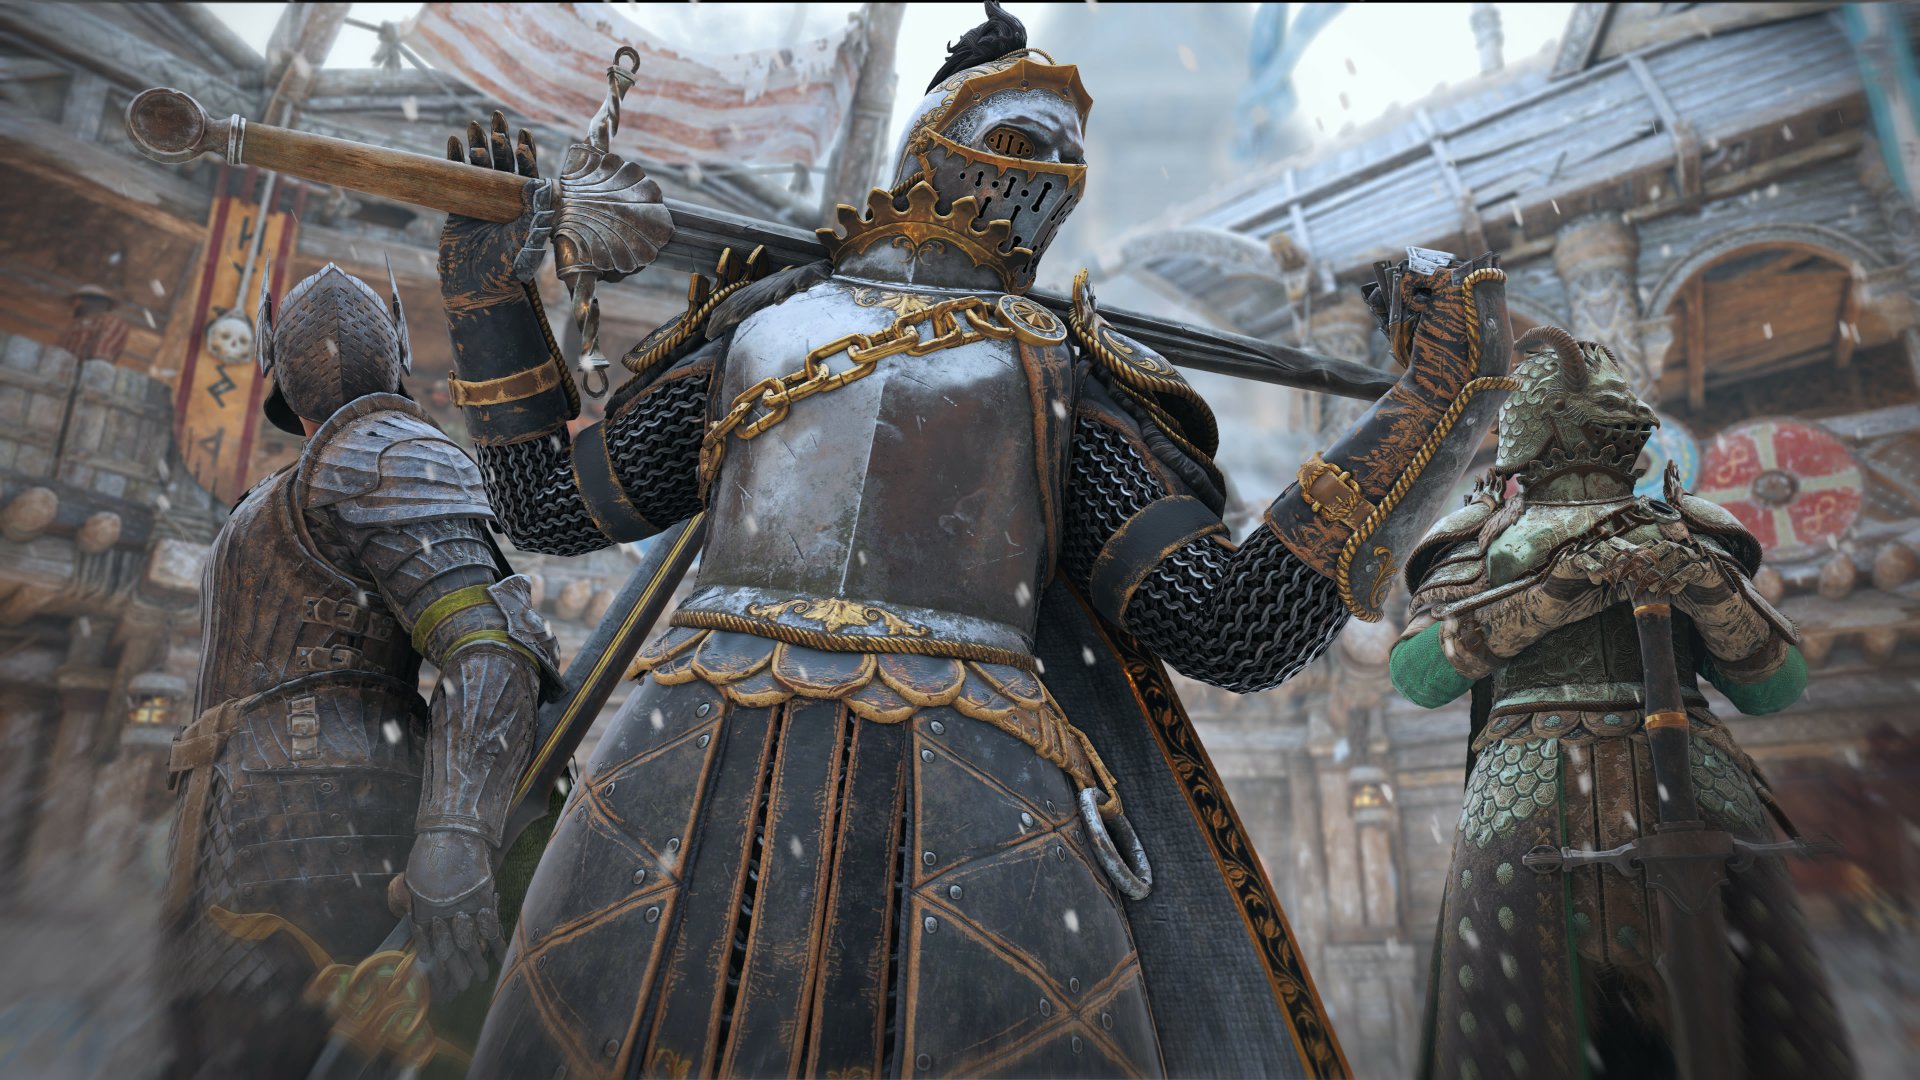 1080p for honor